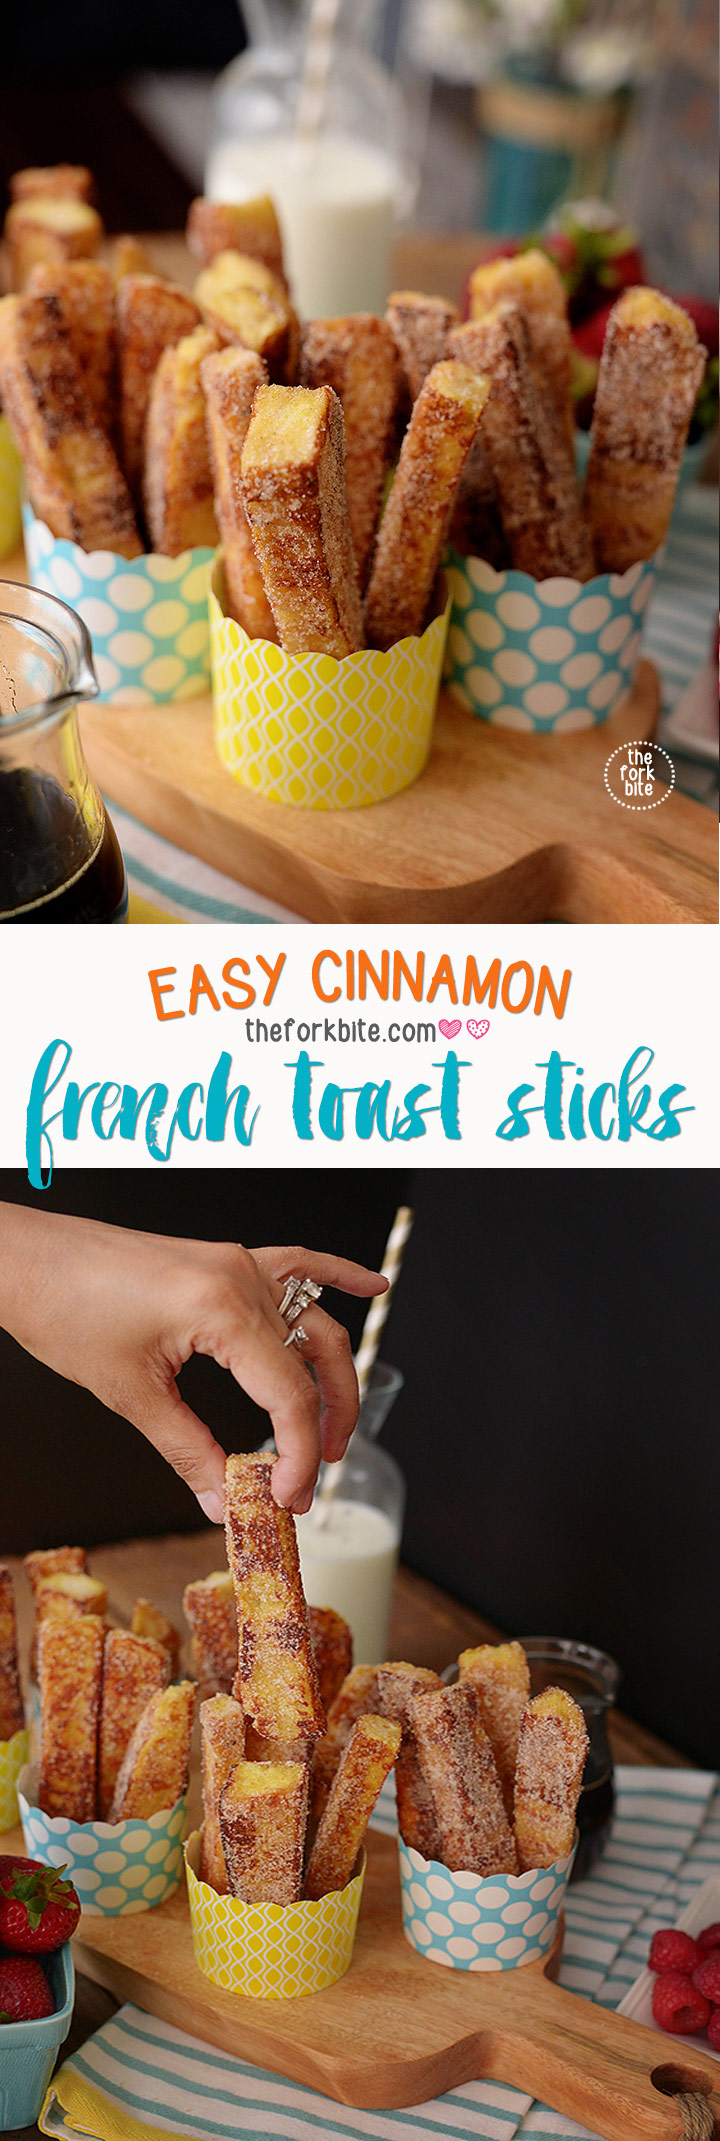 french toast cinnamon stick - Breakfast you can eat with your fingers and dip in syrup